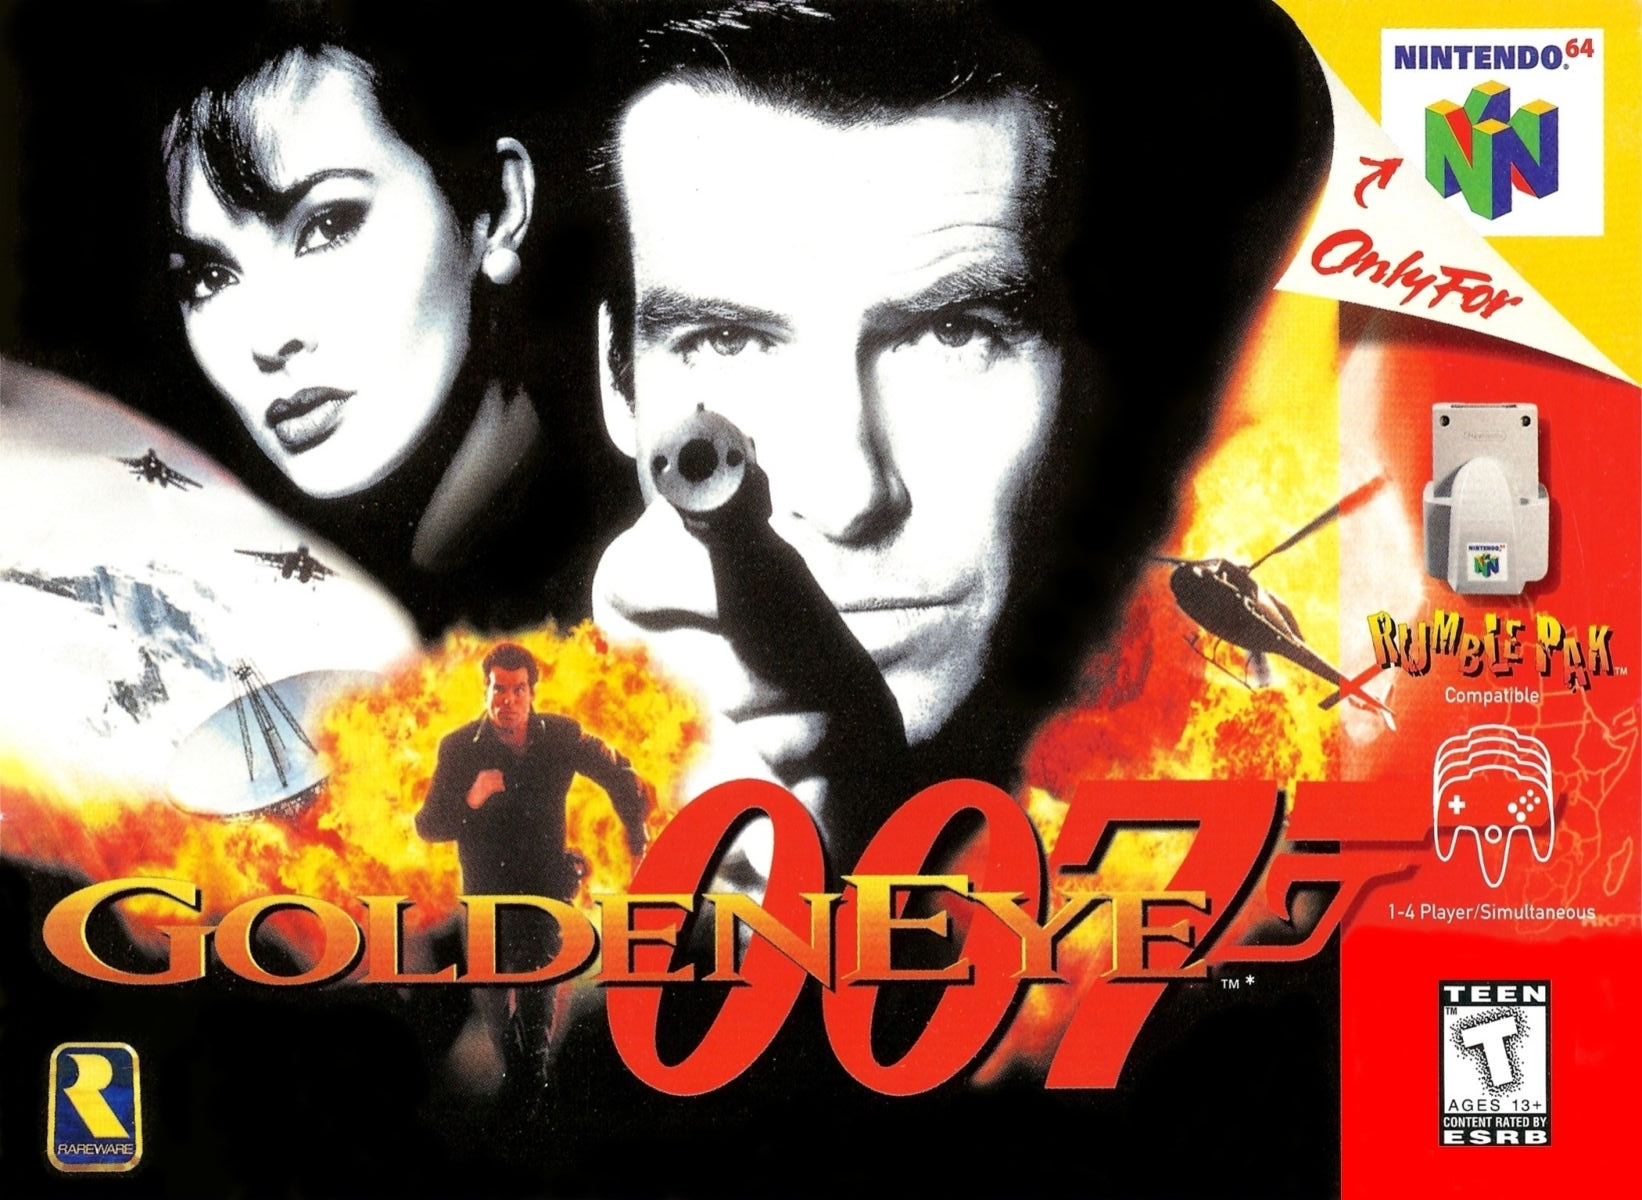 Xbox GoldenEye 007 games available, release imminent?  |  Xbox One